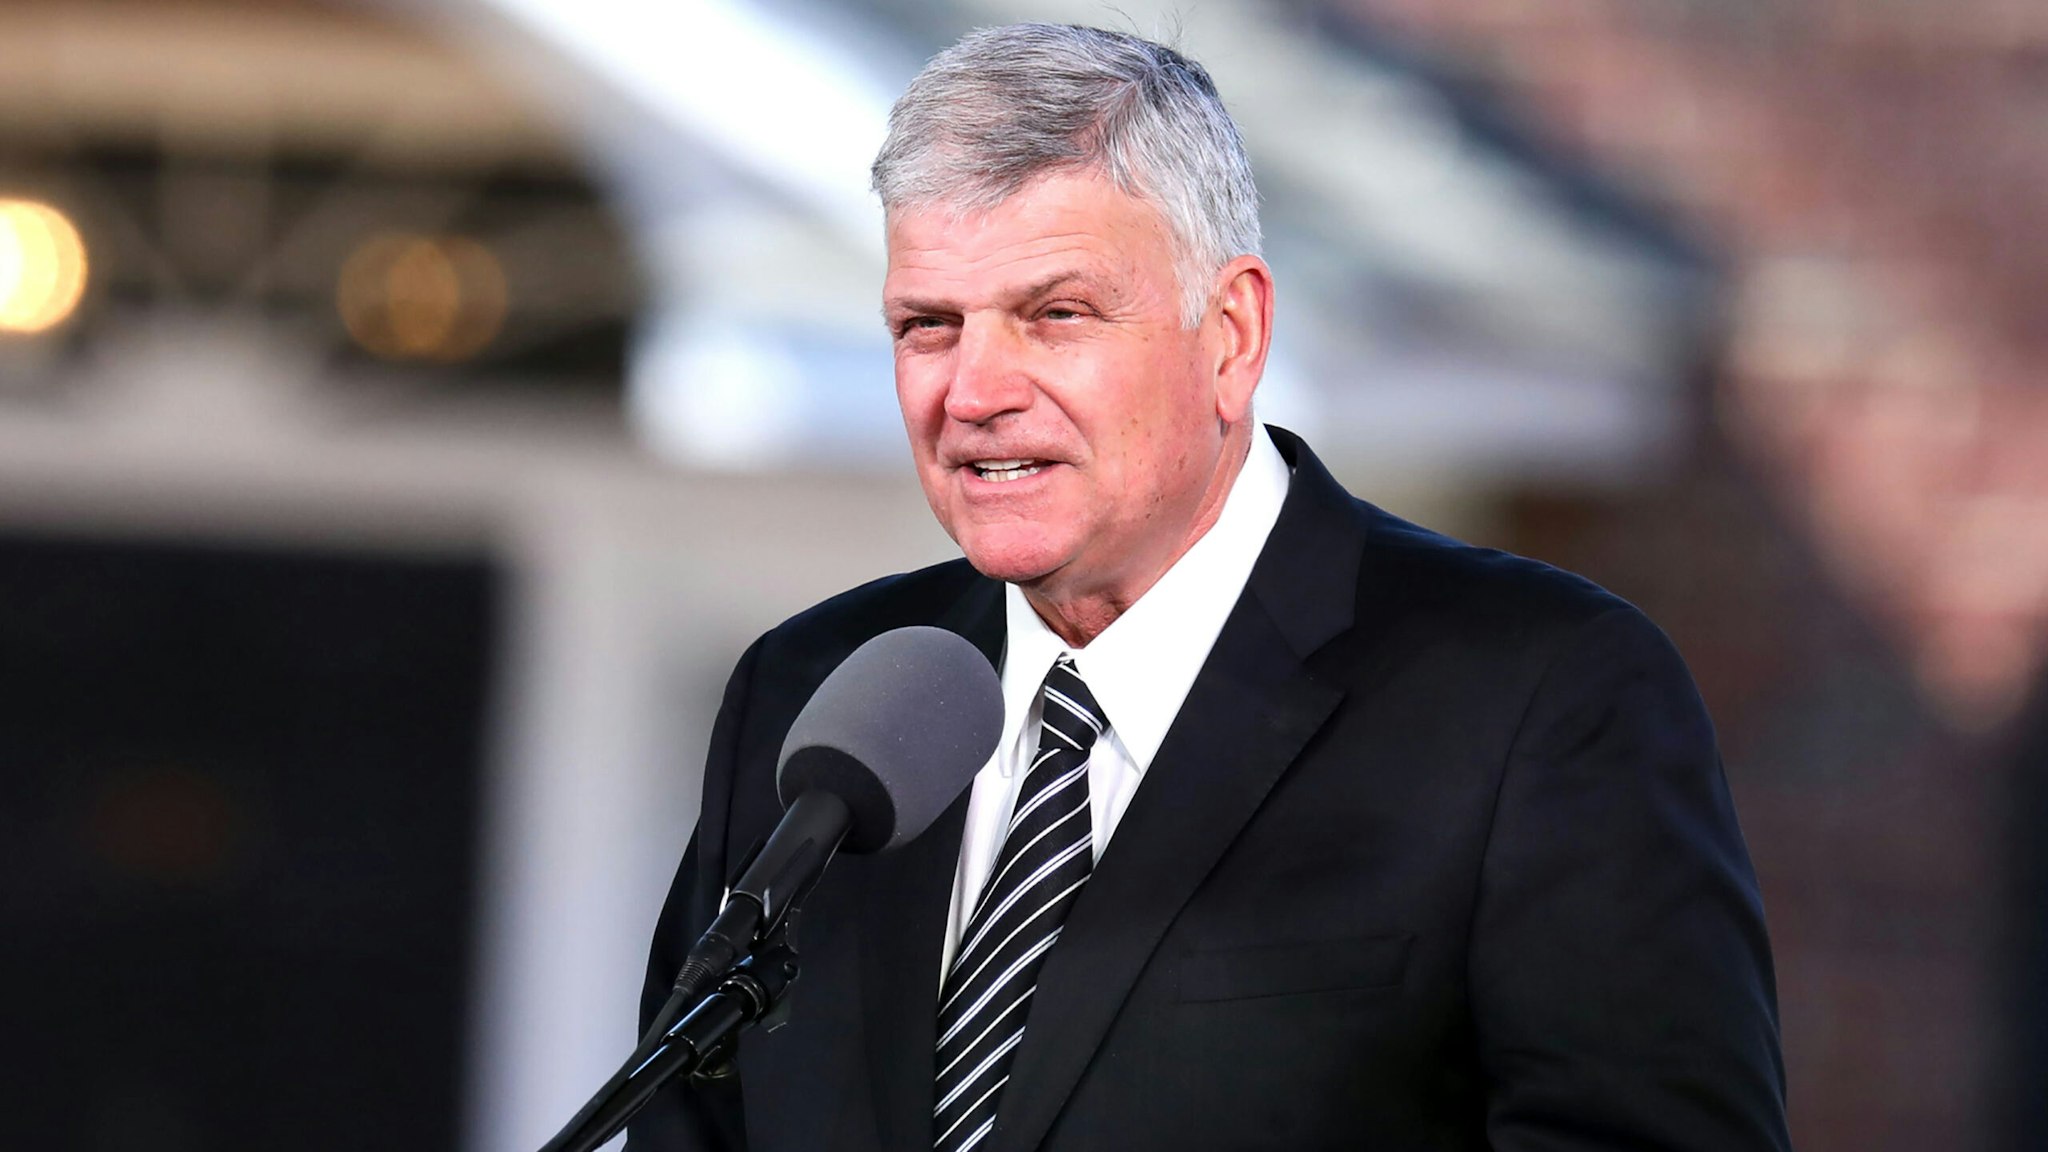 Franklin Graham delivers the eulogy during the funeral of his father Reverend Dr. Billy Graham in Charlotte, North Carolina. Graham, who preached to millions of faithful face to face over his decades-long career and tens of millions more through the power of television, died last week at age 99, leaving a Christian evangelist movement without its best known champion of modern times.